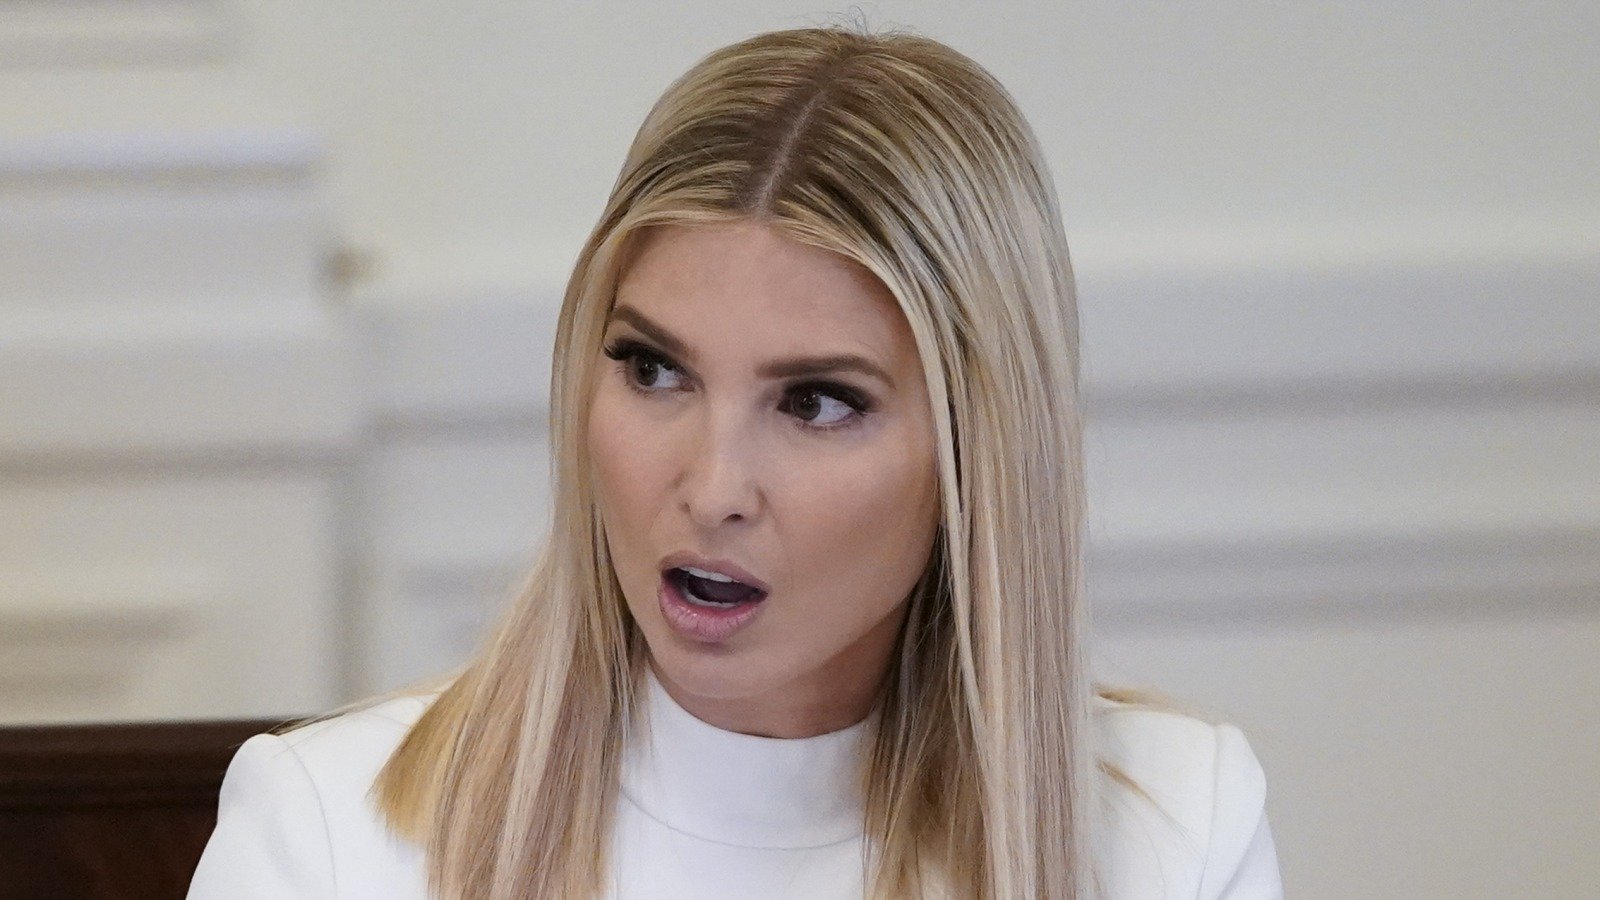 Ivanka Trump Has Changed A Lot Since Being At The White House